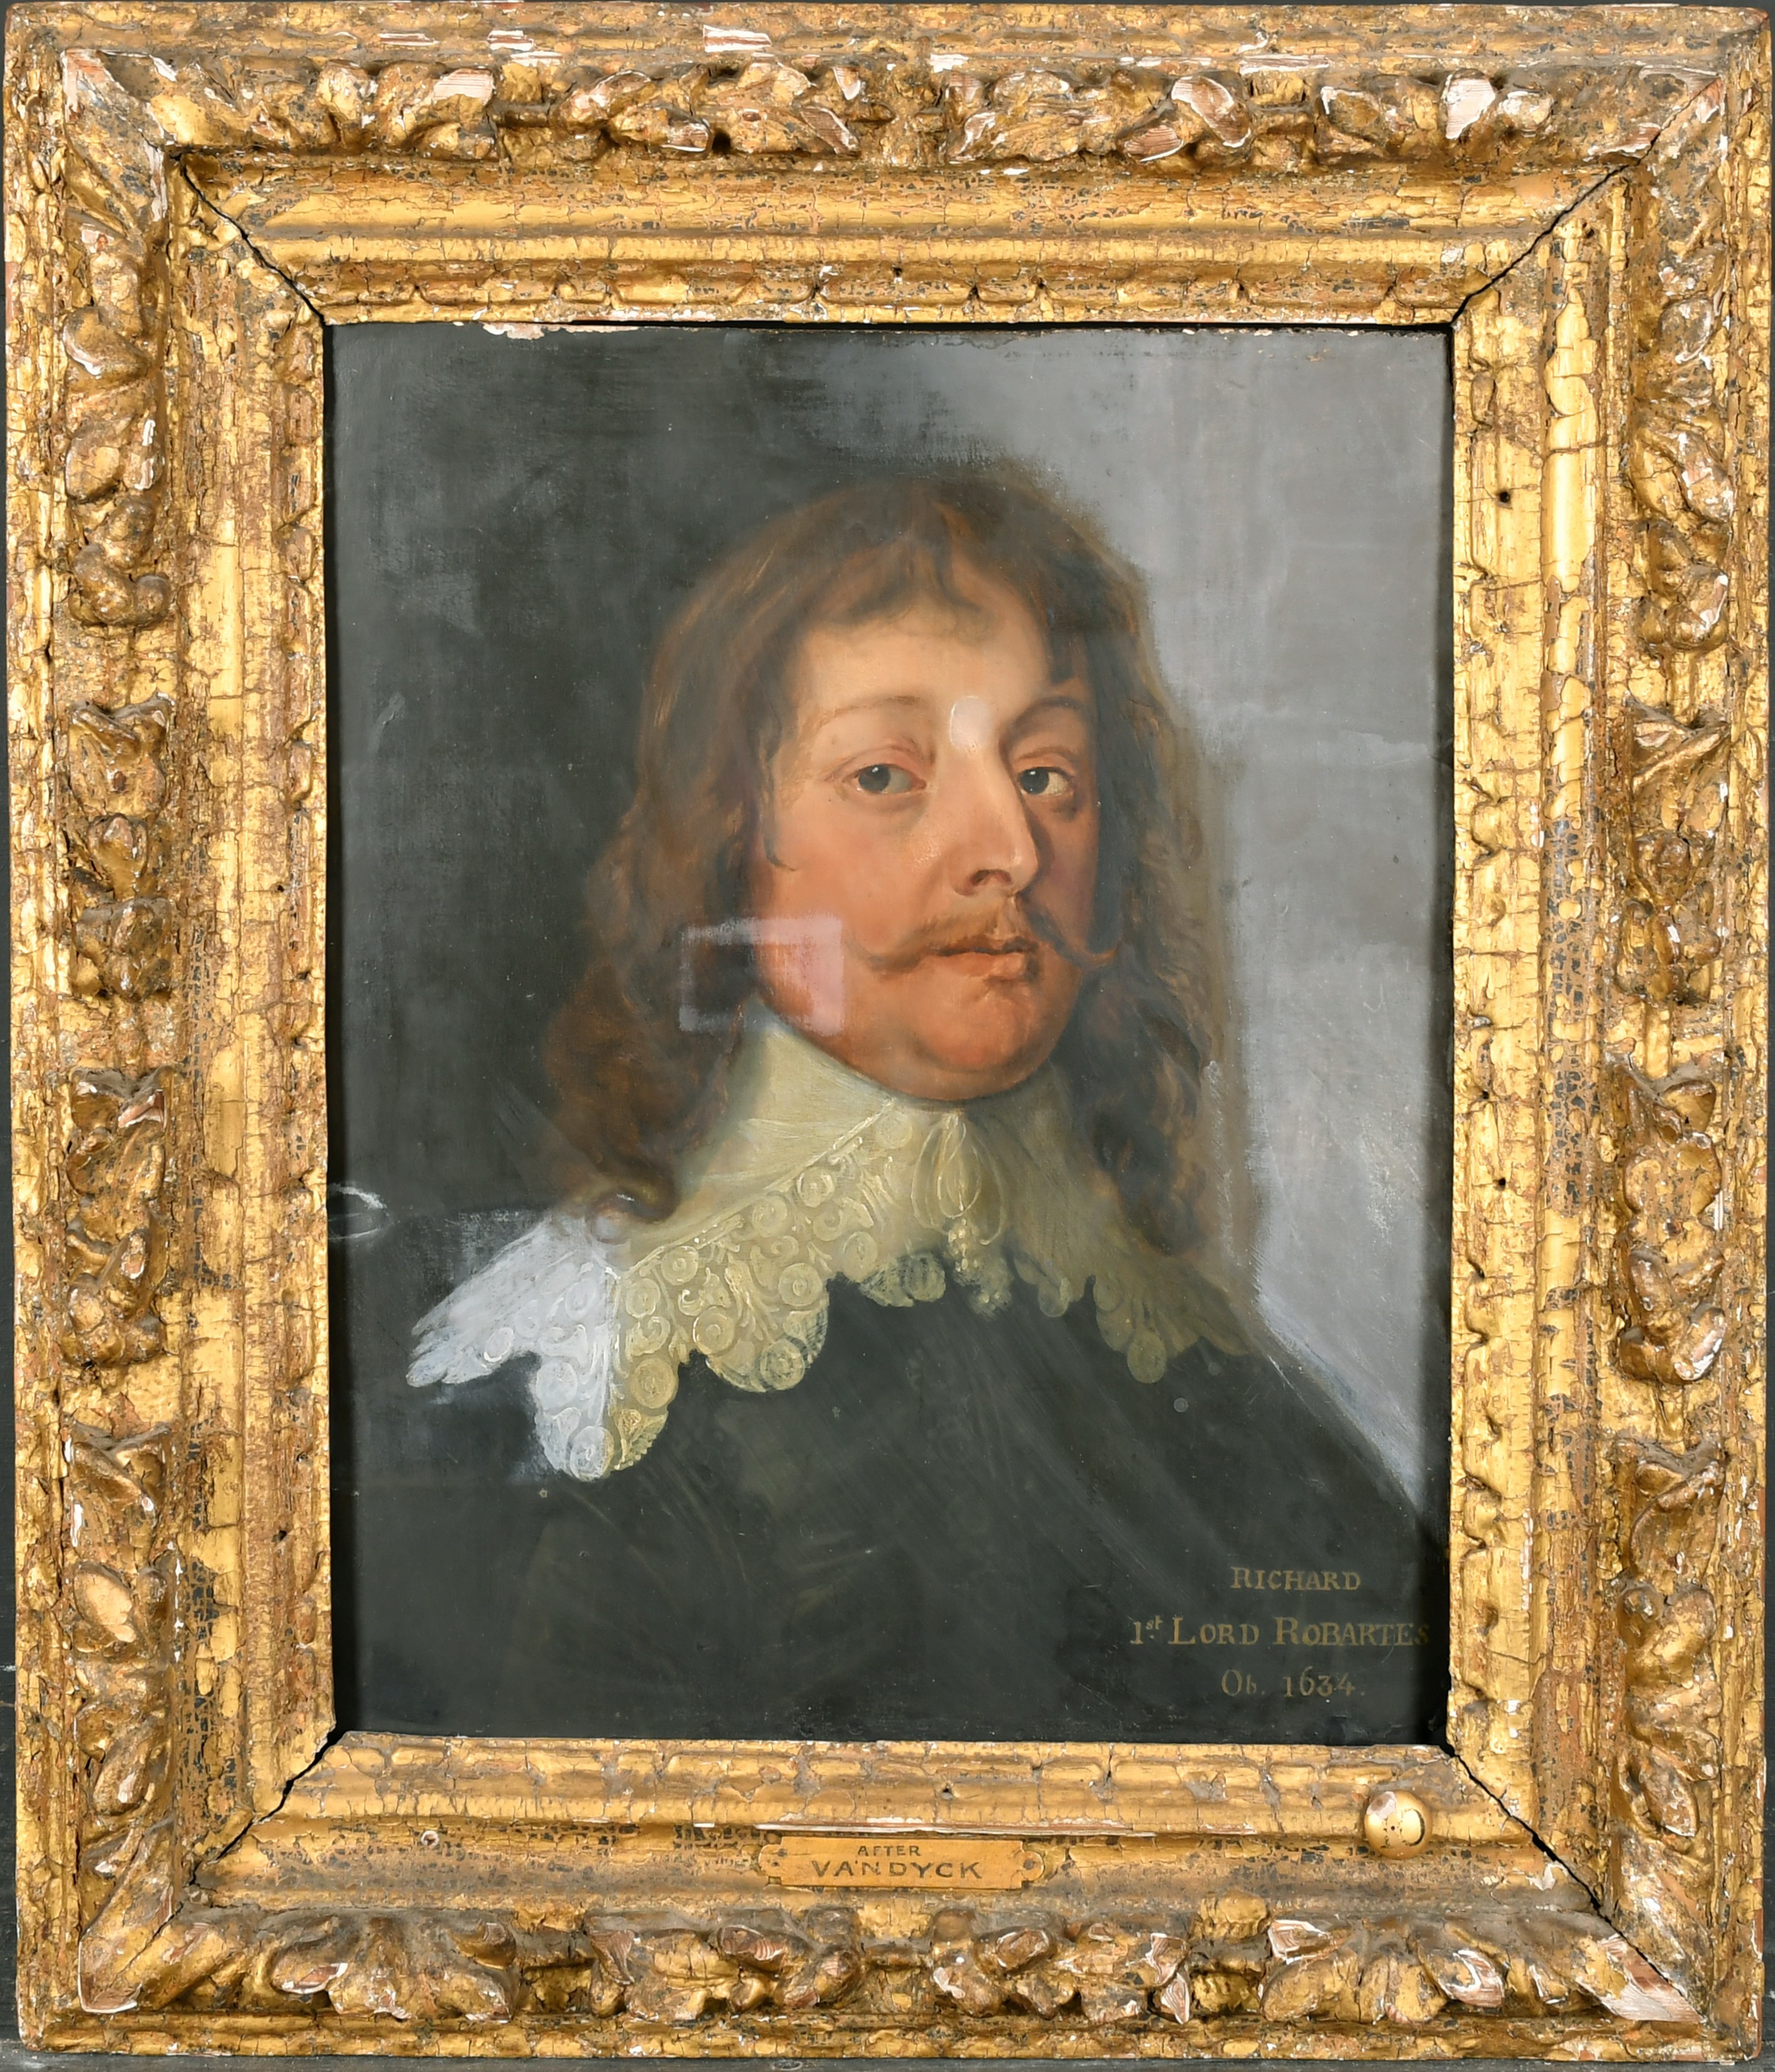 Circle of Anthony Van Dyck (1599-1641) Flemish. Portrait of Richard, 1st Lord Robartes, Oil on - Image 2 of 5